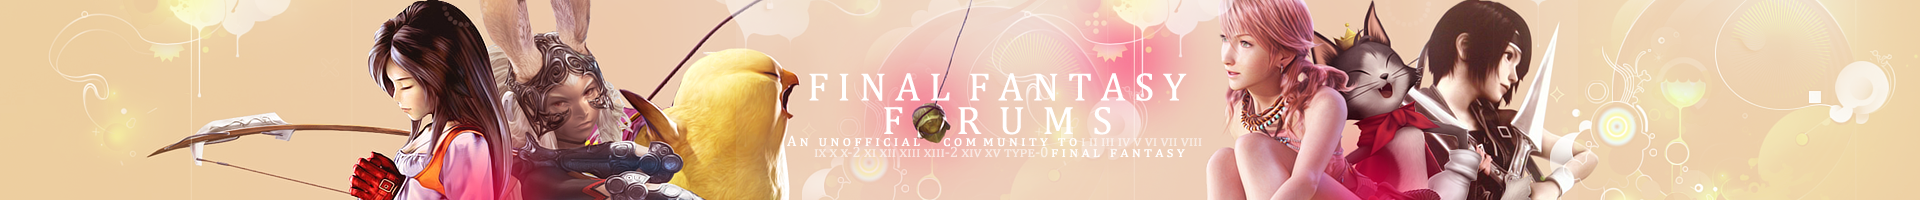 final_fantasy_forums_banner_ii___2015__by_seventosix-d9tfvy4.png